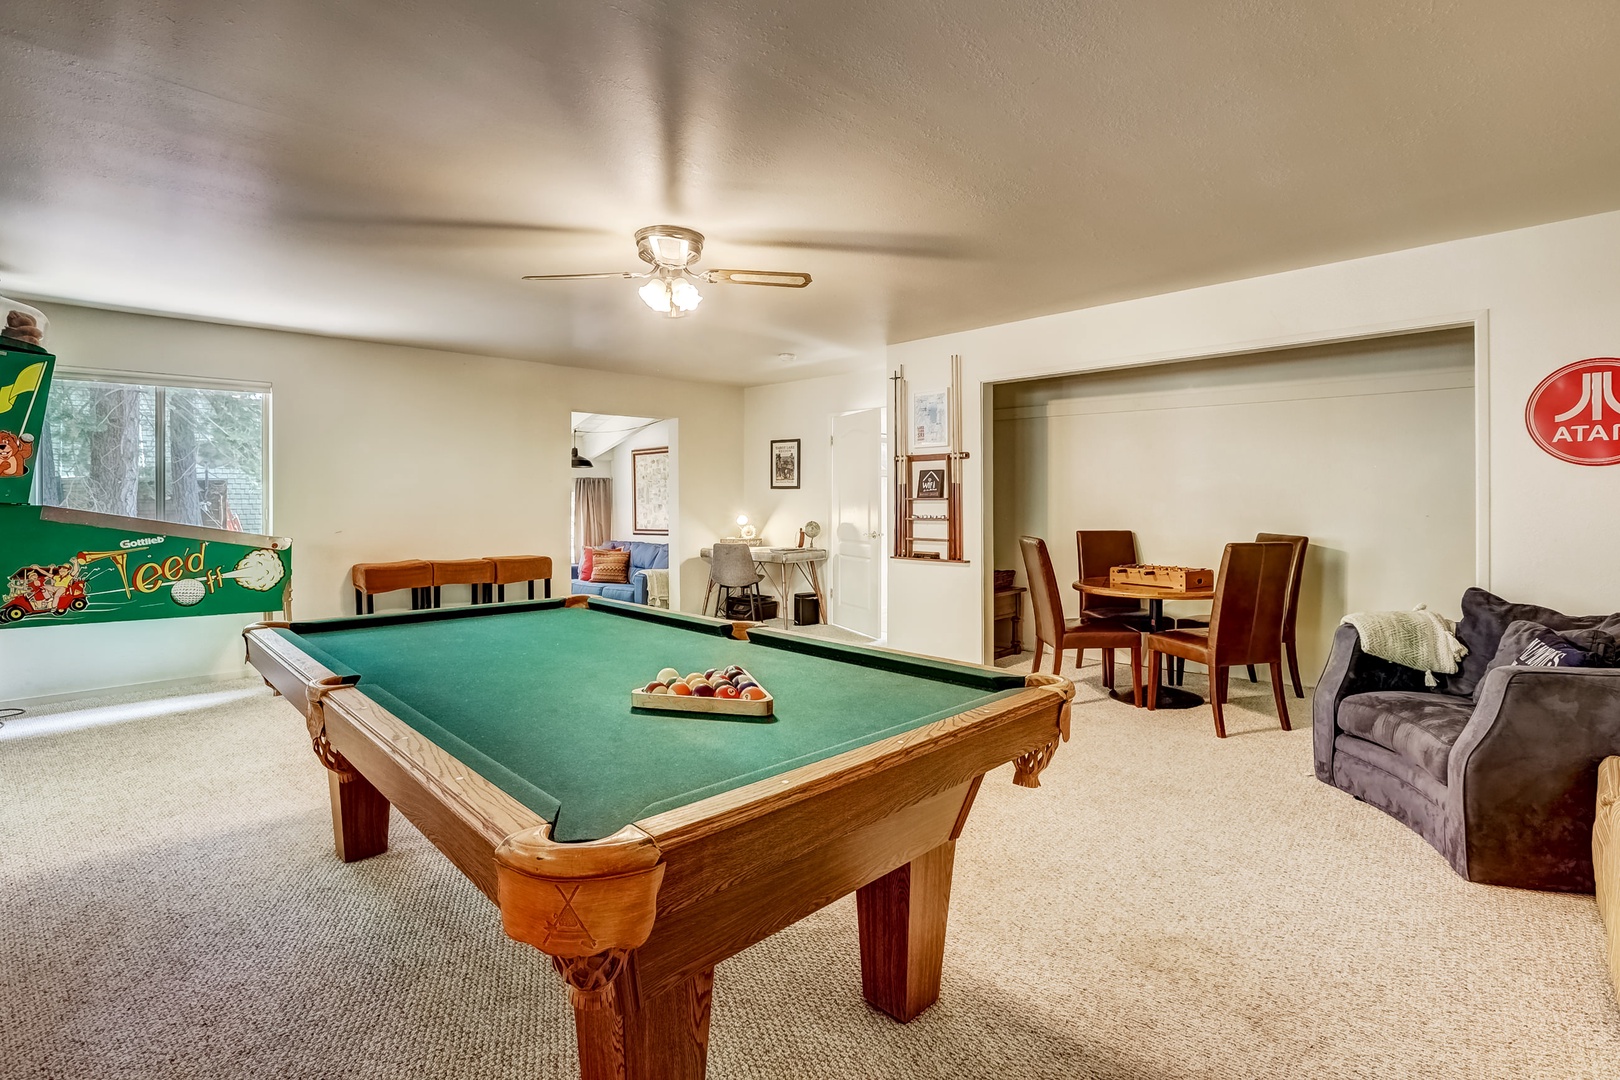 Game room with pool table & arcade game